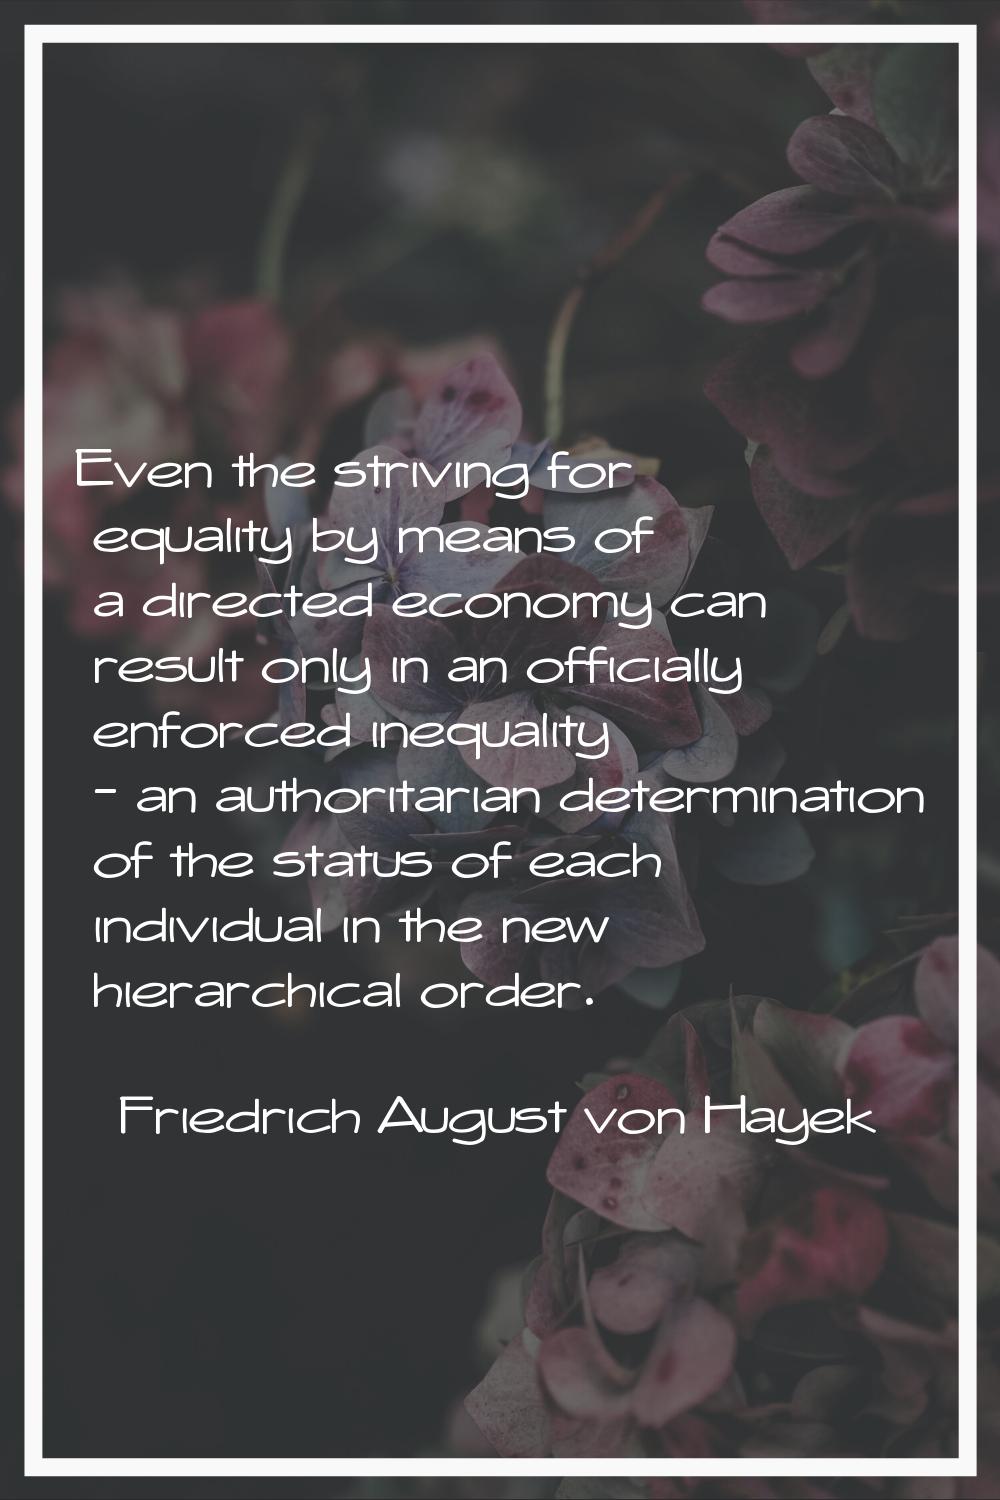 Even the striving for equality by means of a directed economy can result only in an officially enfo